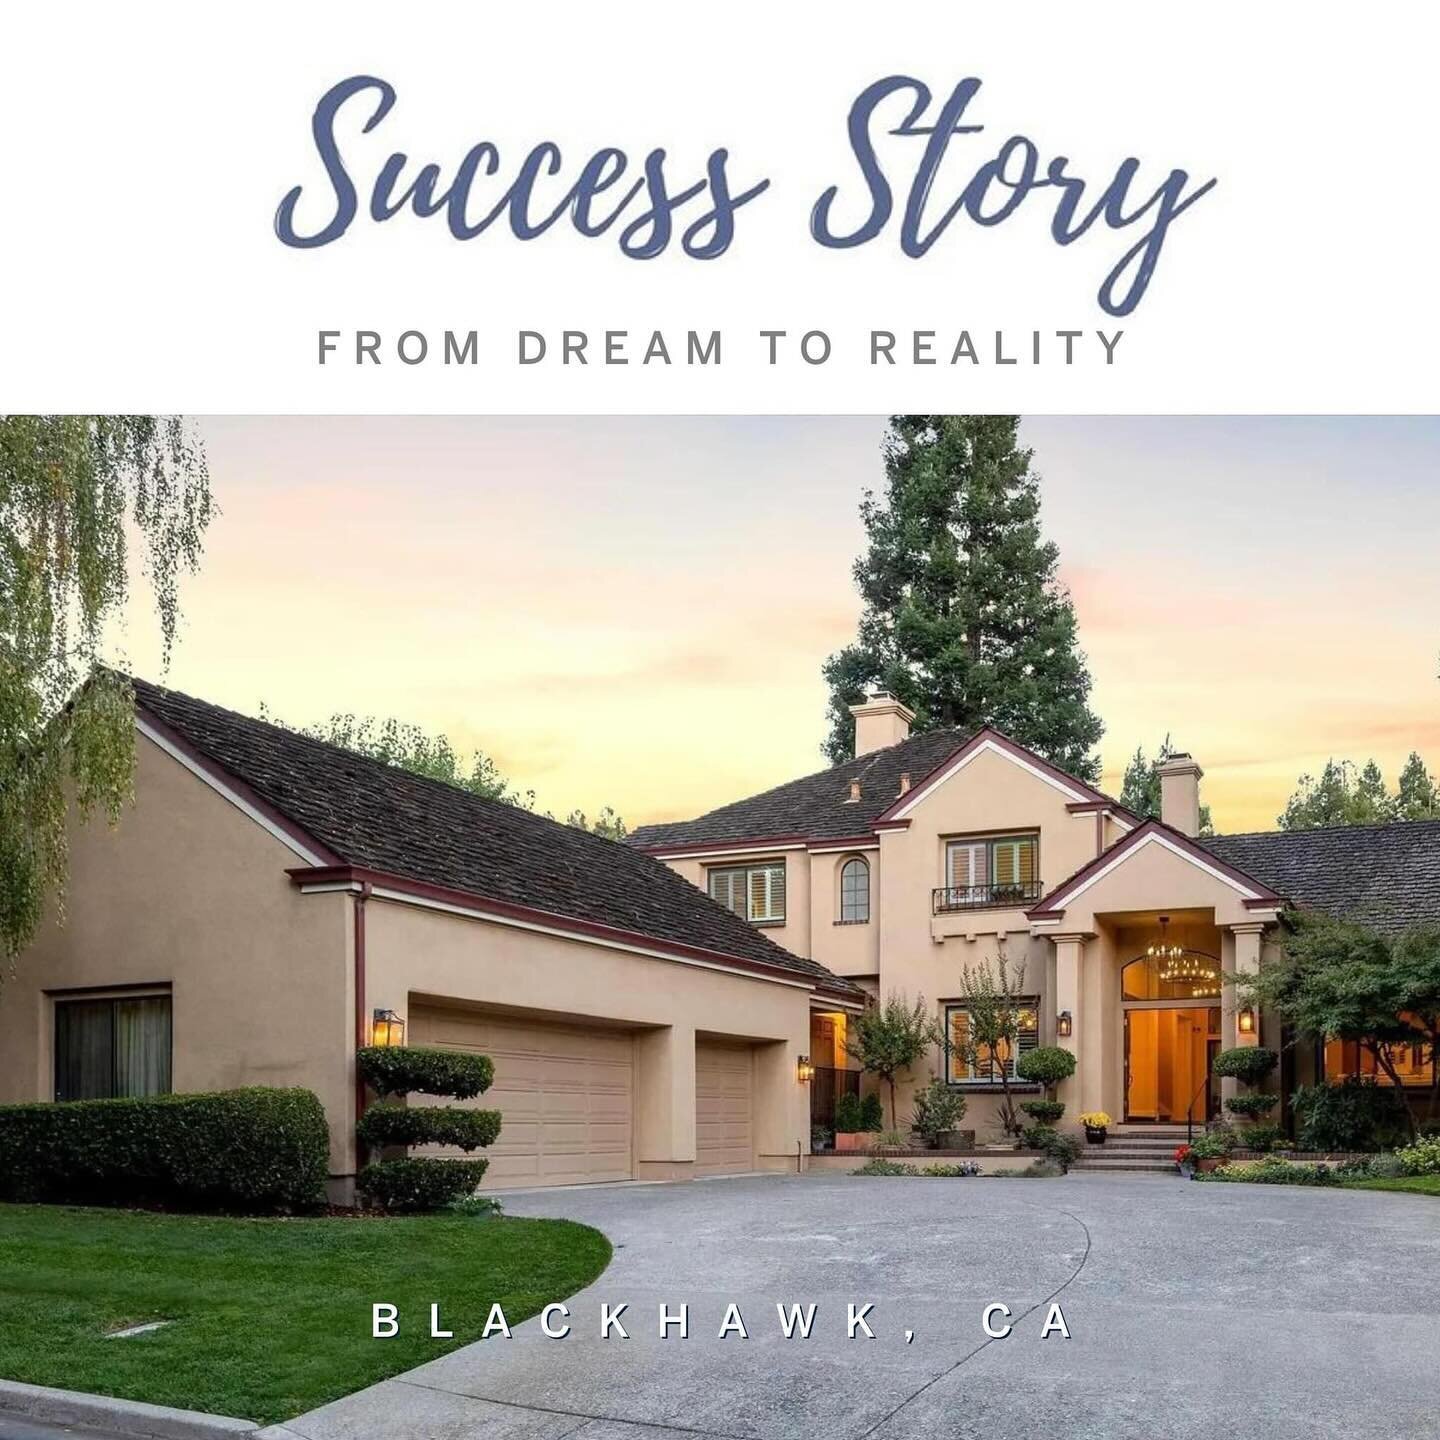 Our client was planning to sell his home in Castro Valley, CA, which he owned free and clear. However, he had his eyes set on a beautiful property at in Danville, CA 94506, and he needed a competitive cash offer to secure it. 

That&rsquo;s when we s